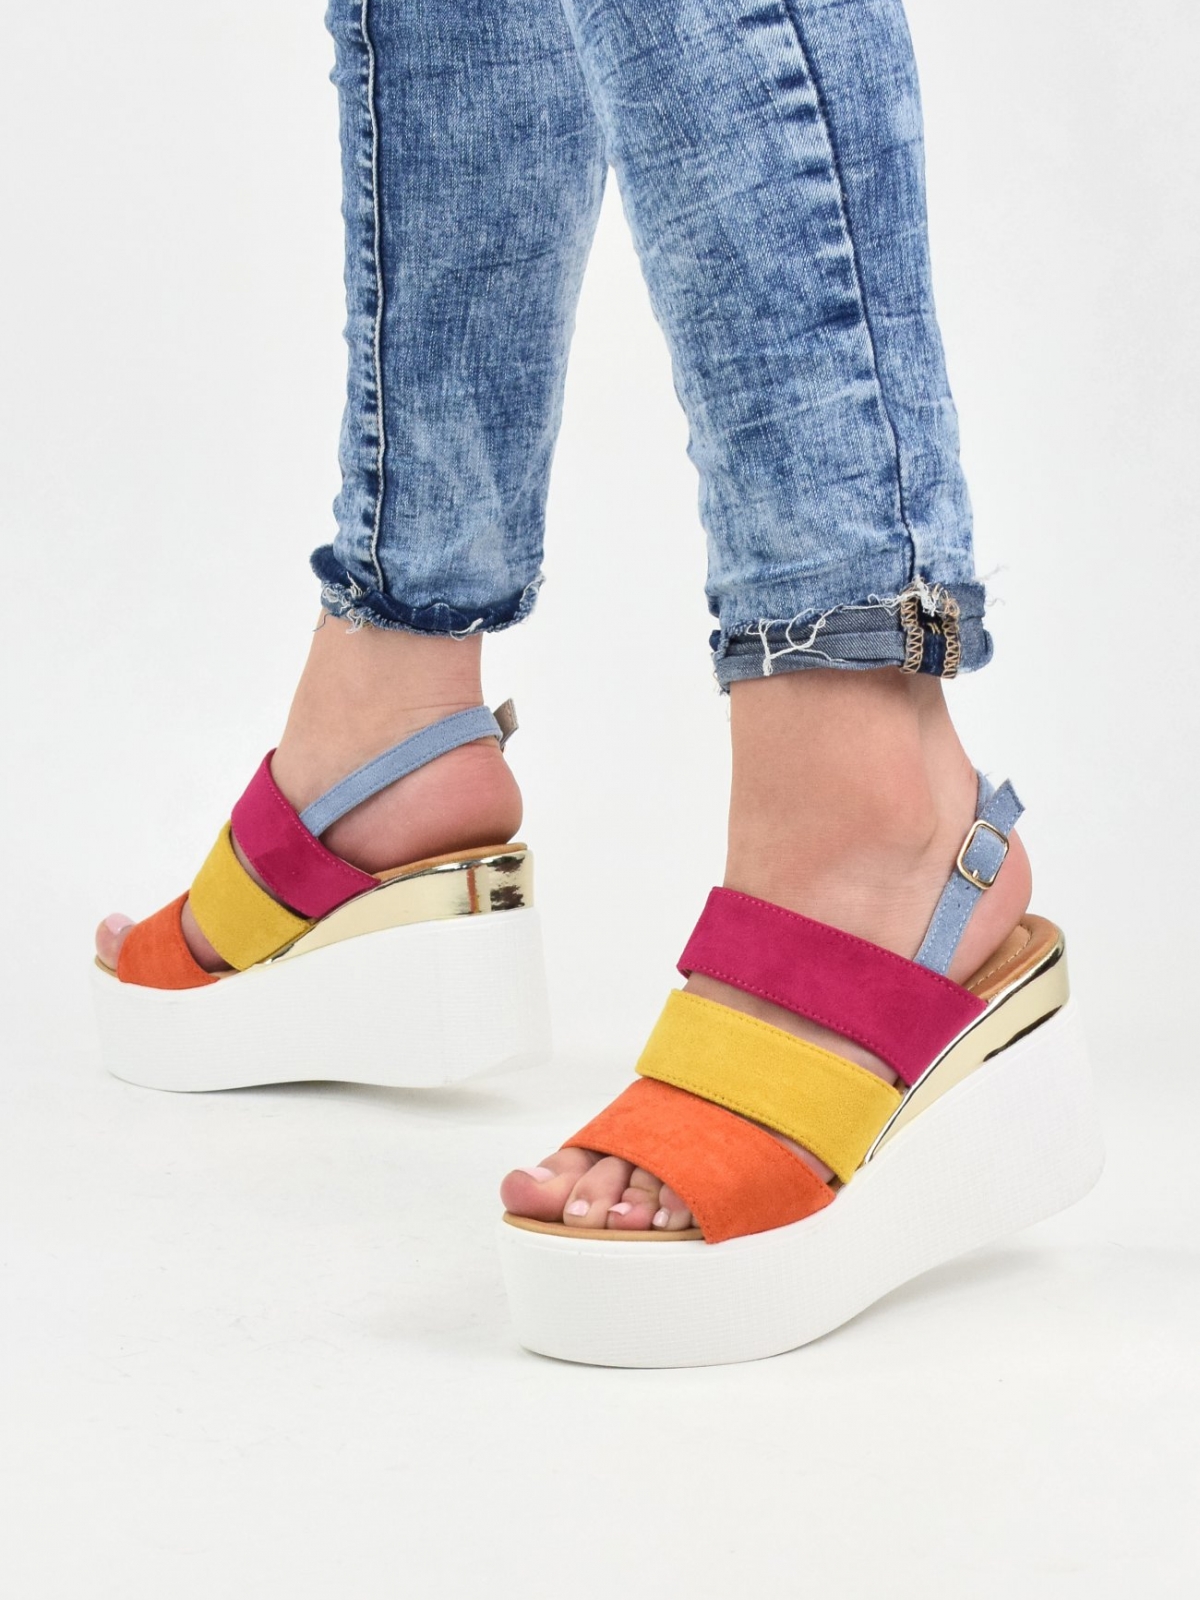 Stylish sandals with stable sole in multicolor